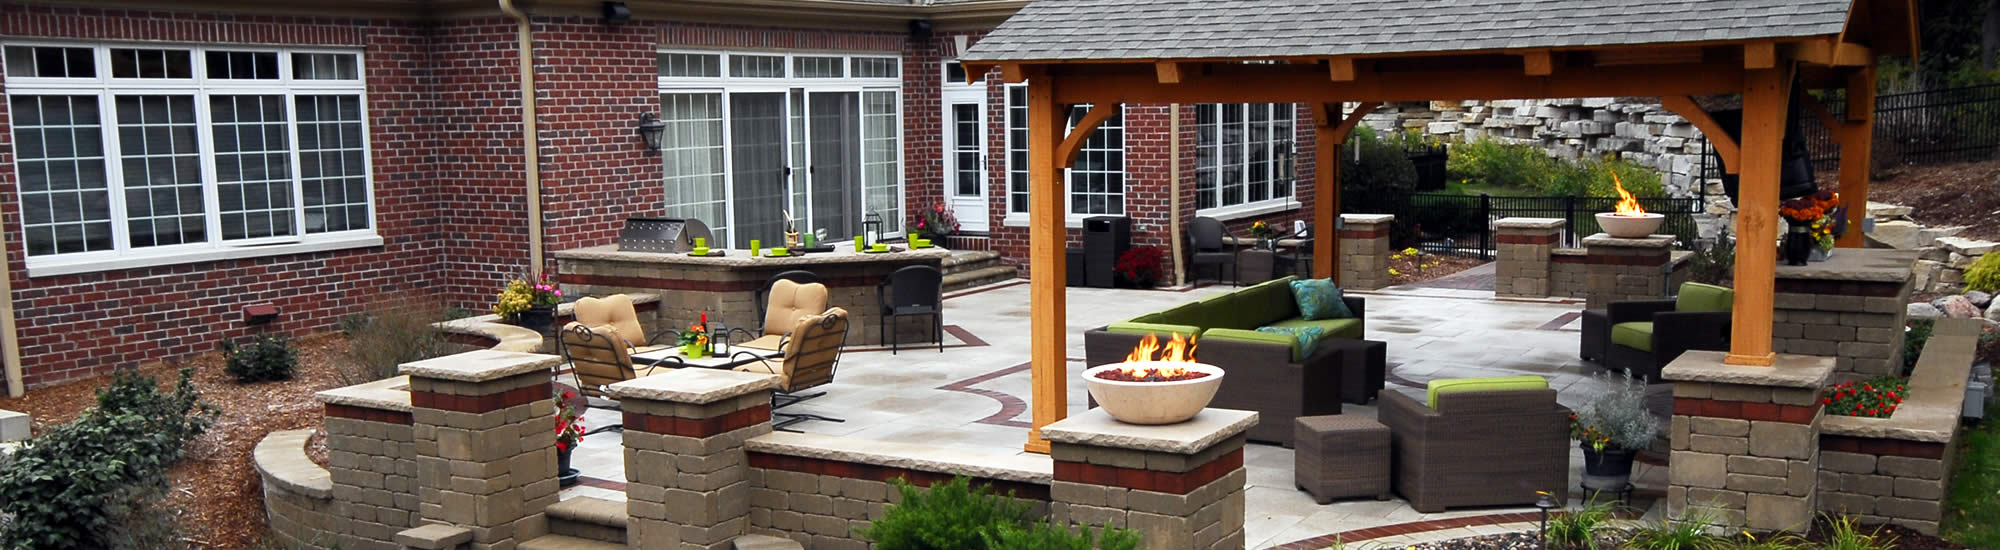 Outdoor Living / Patios / Landscaped Yards